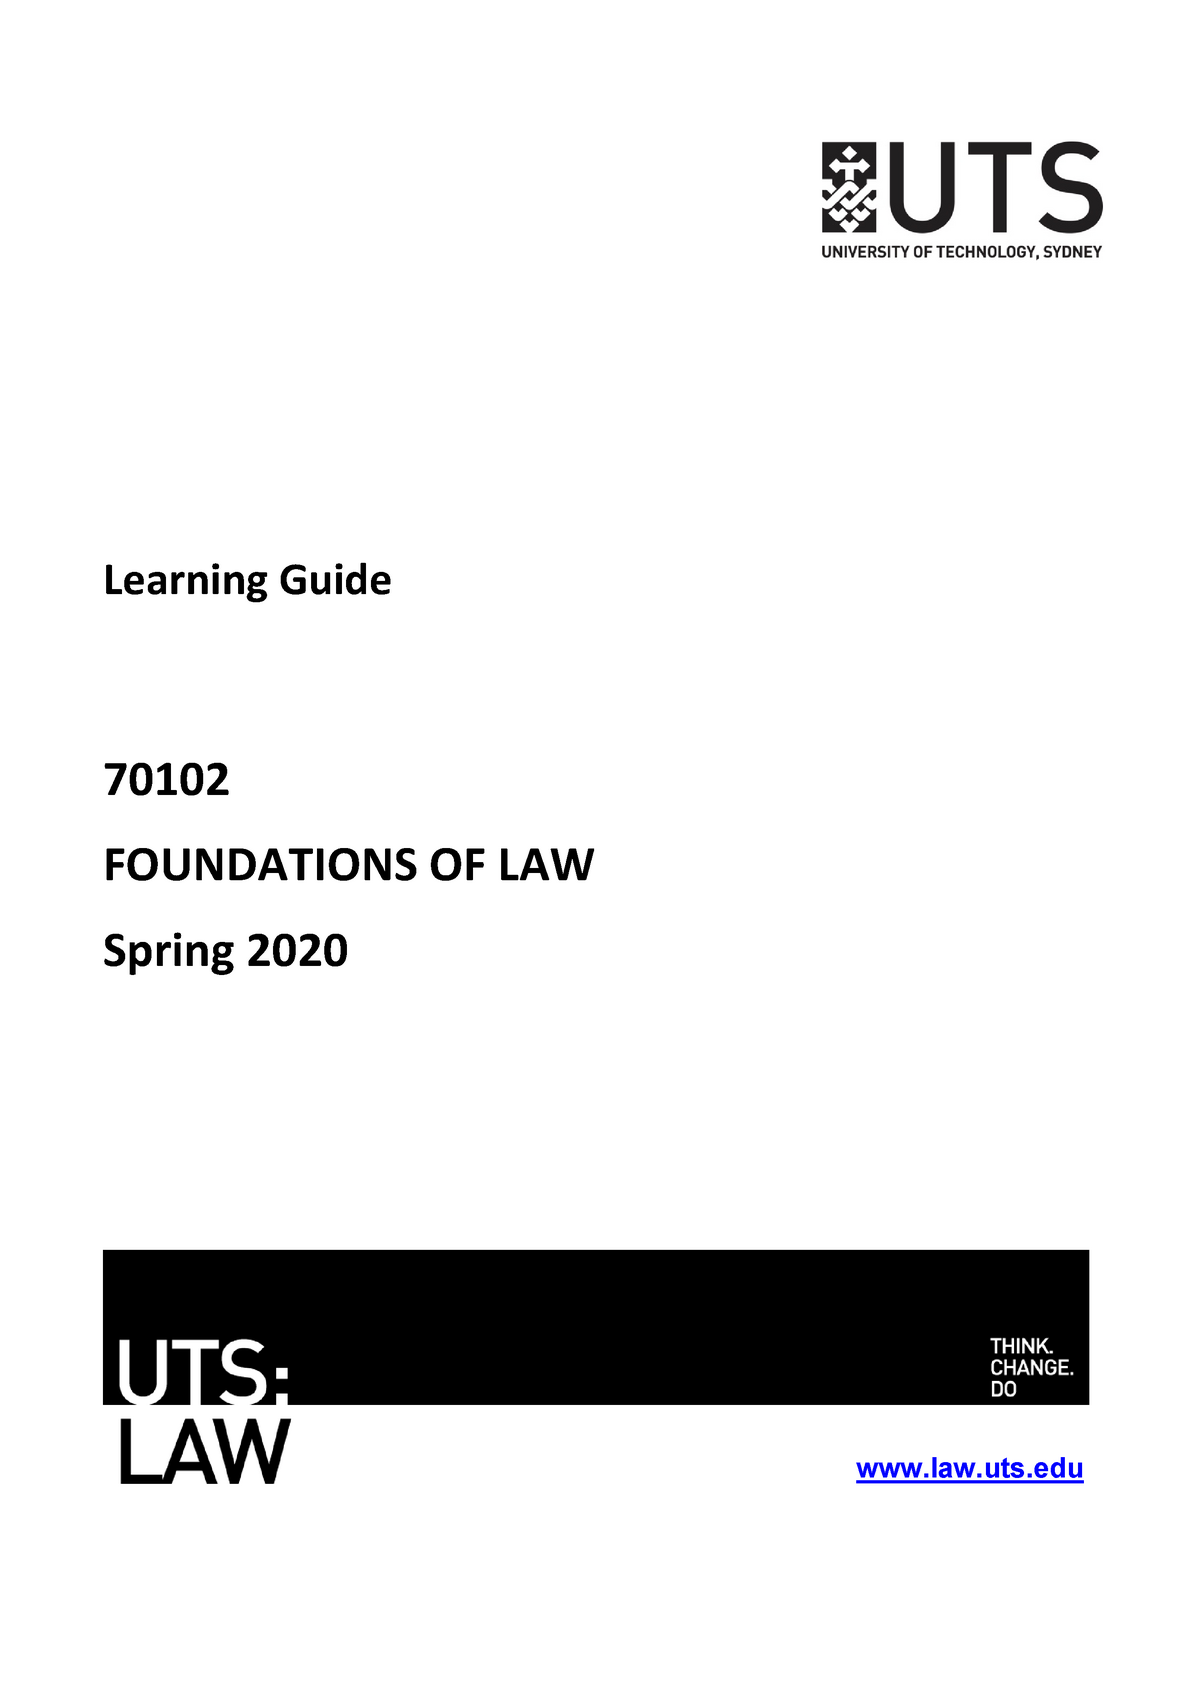 learning-guide-spring-2020-2-warning-tt-undefined-function-32